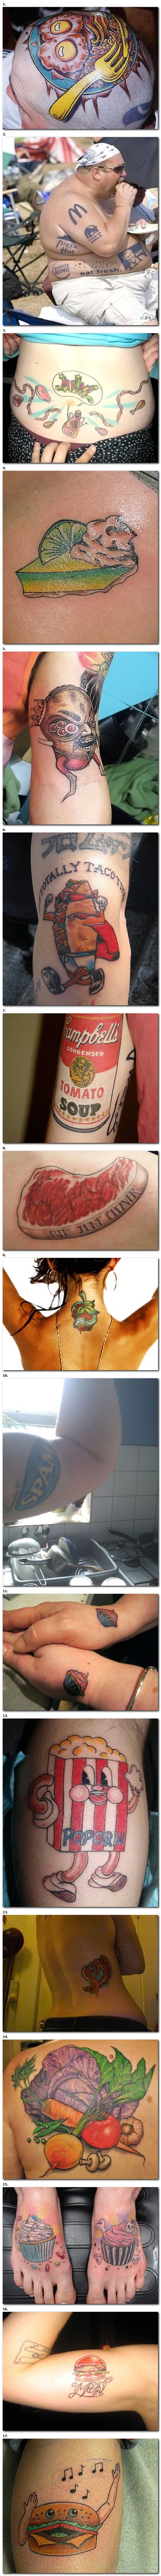 Tattoos with our favorite subject-food.